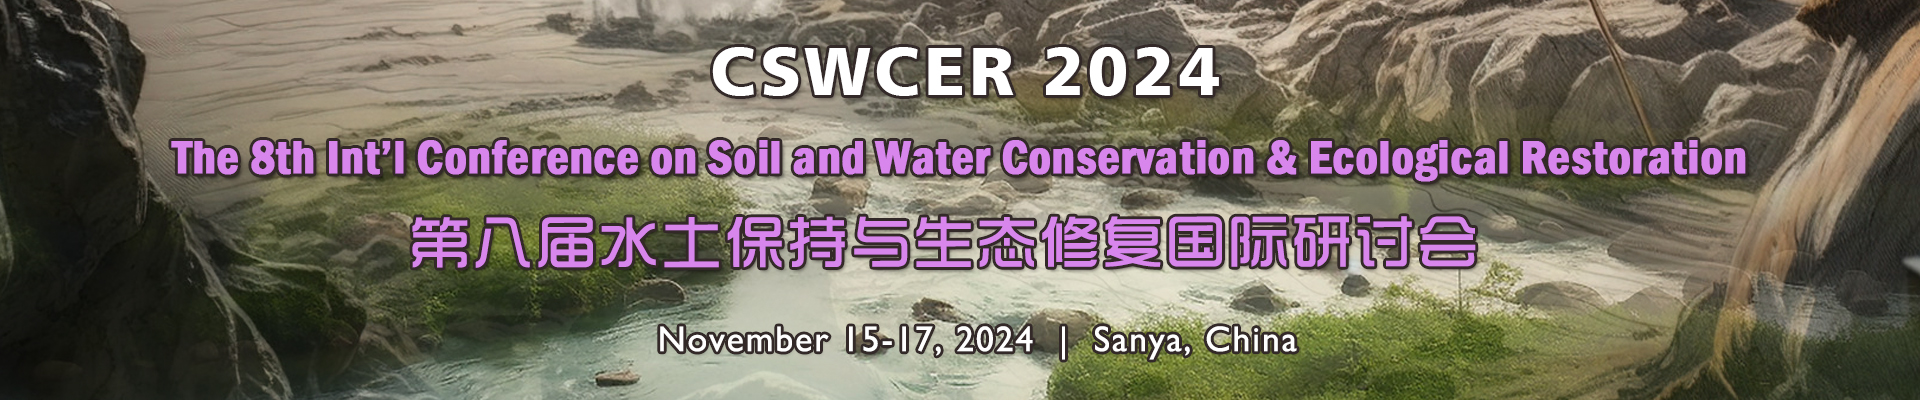 The 8th Int’l Conference on Soil and Water Conservation & Ecological Restoration (CSWCER 2024), Sanya, Hainan, China